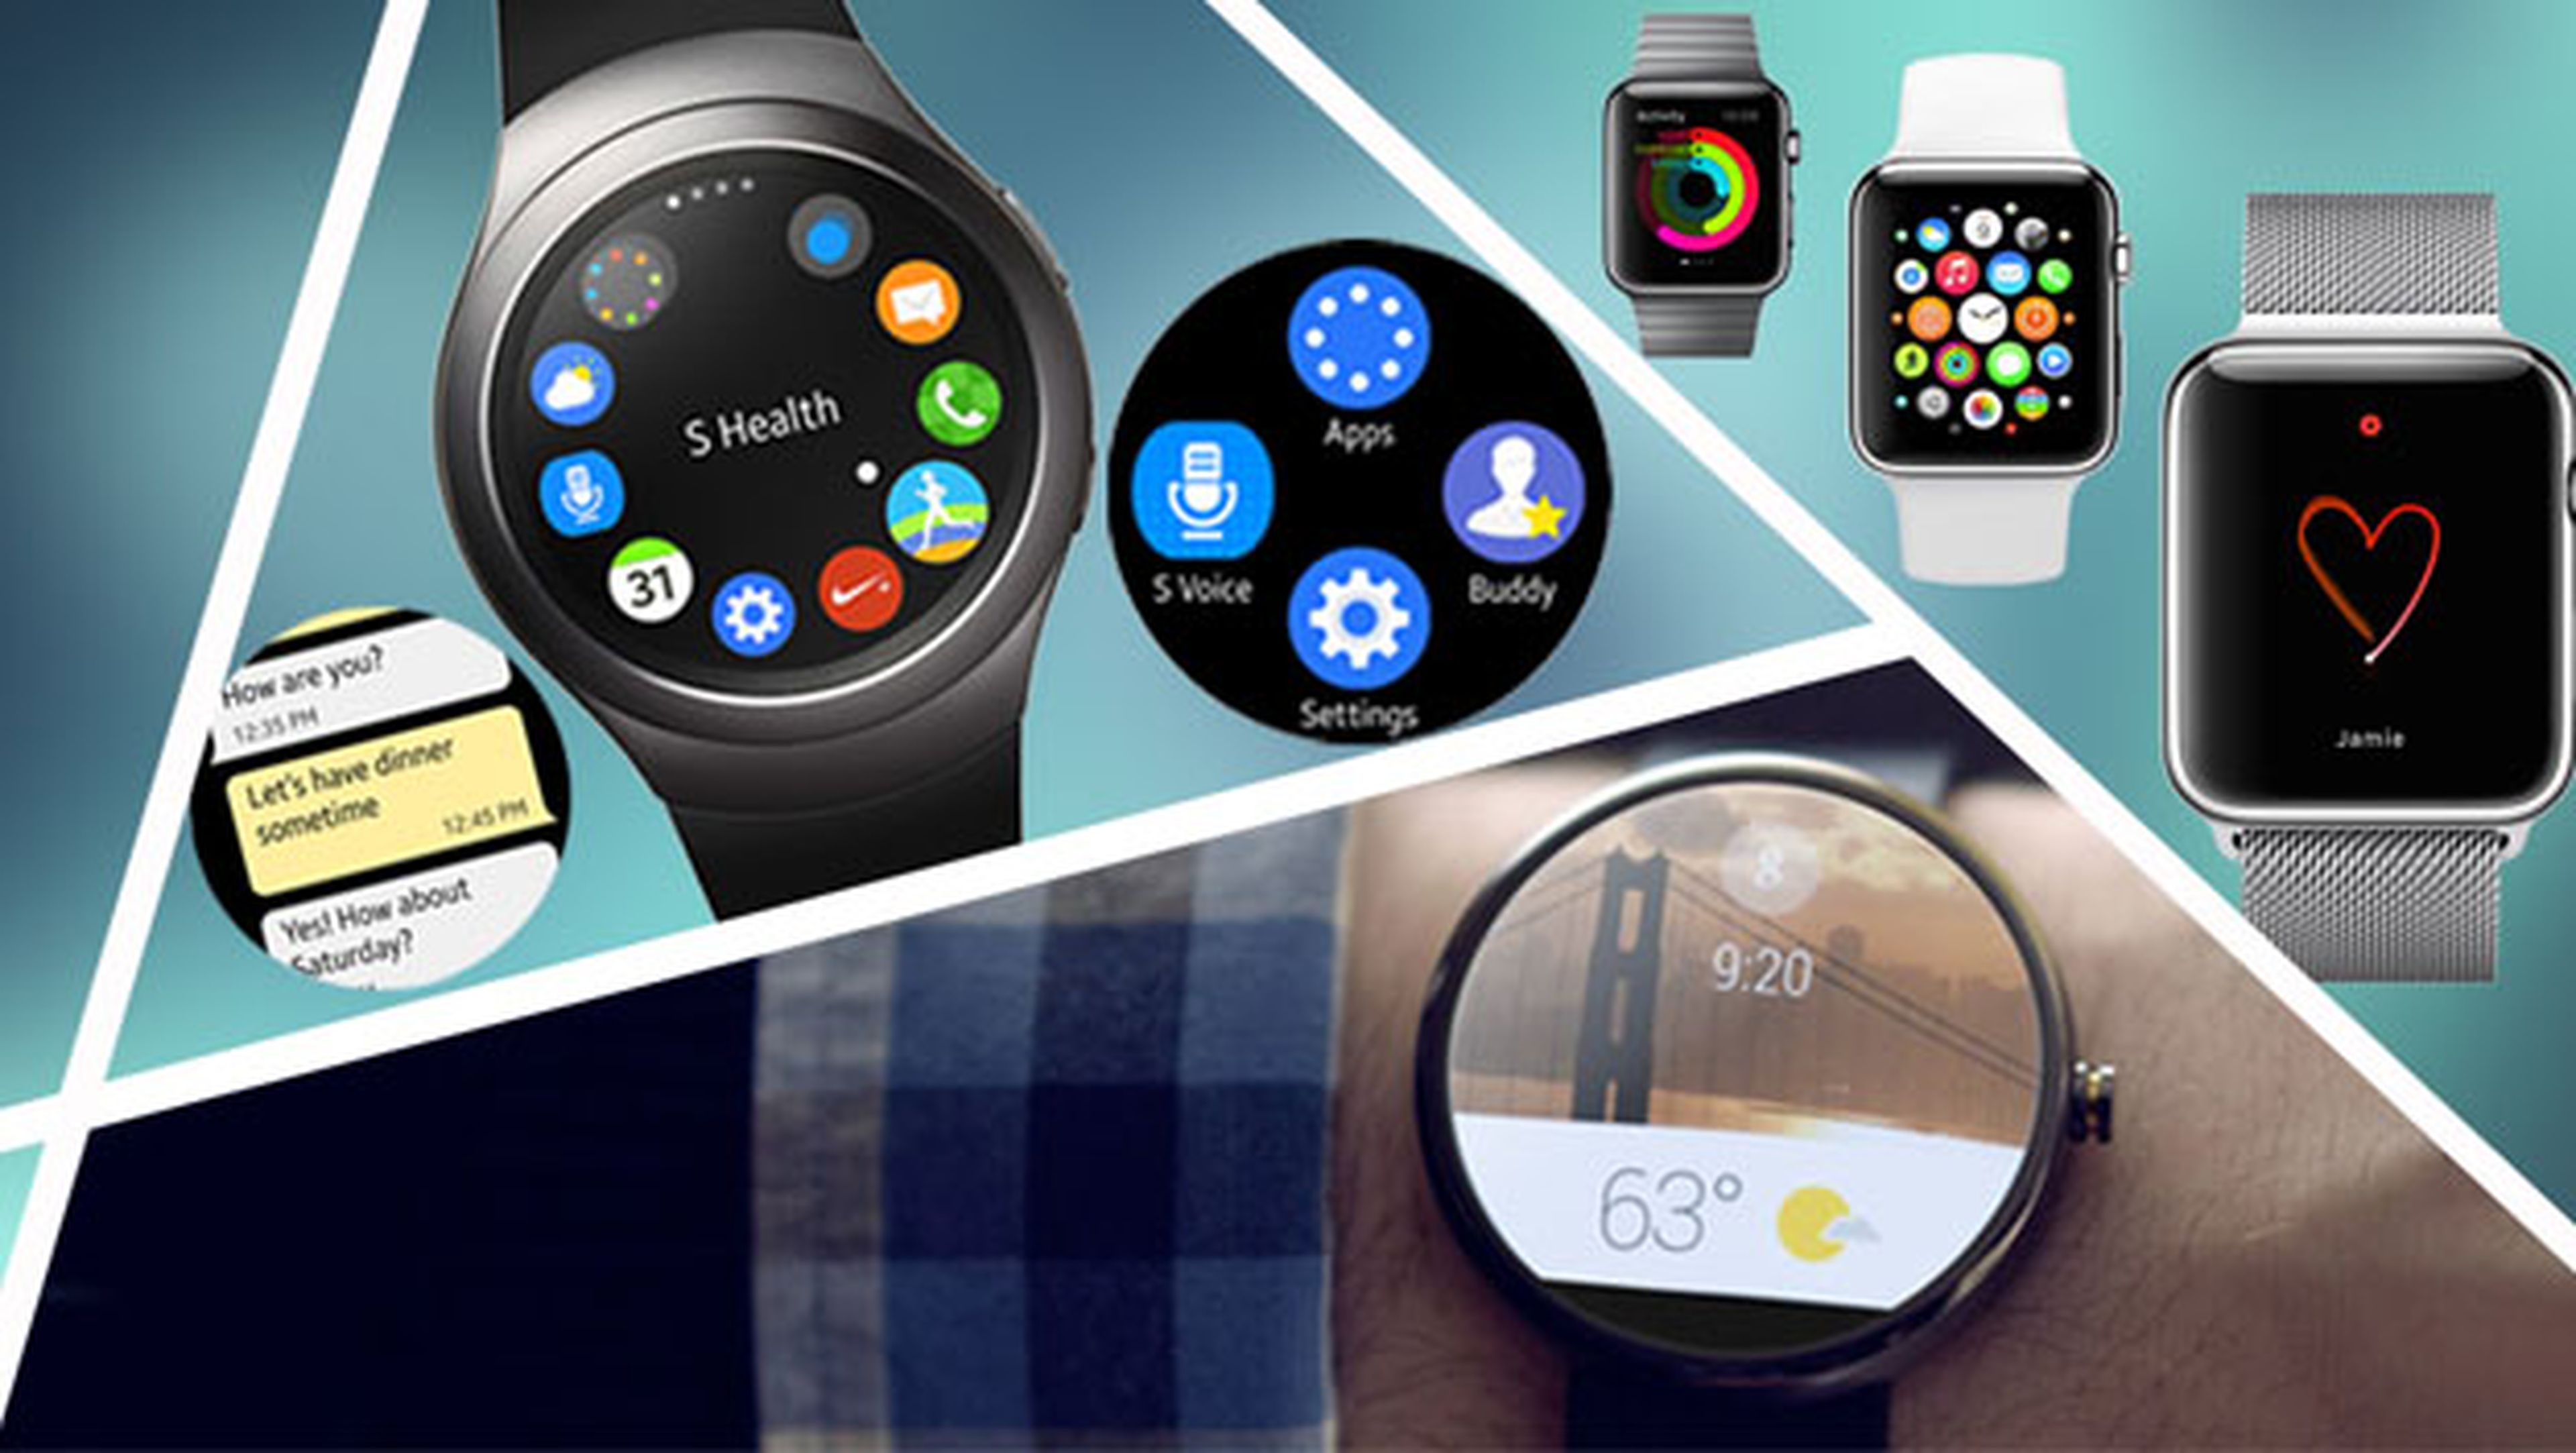 Comparativa Android Wear Tizen Watch OS